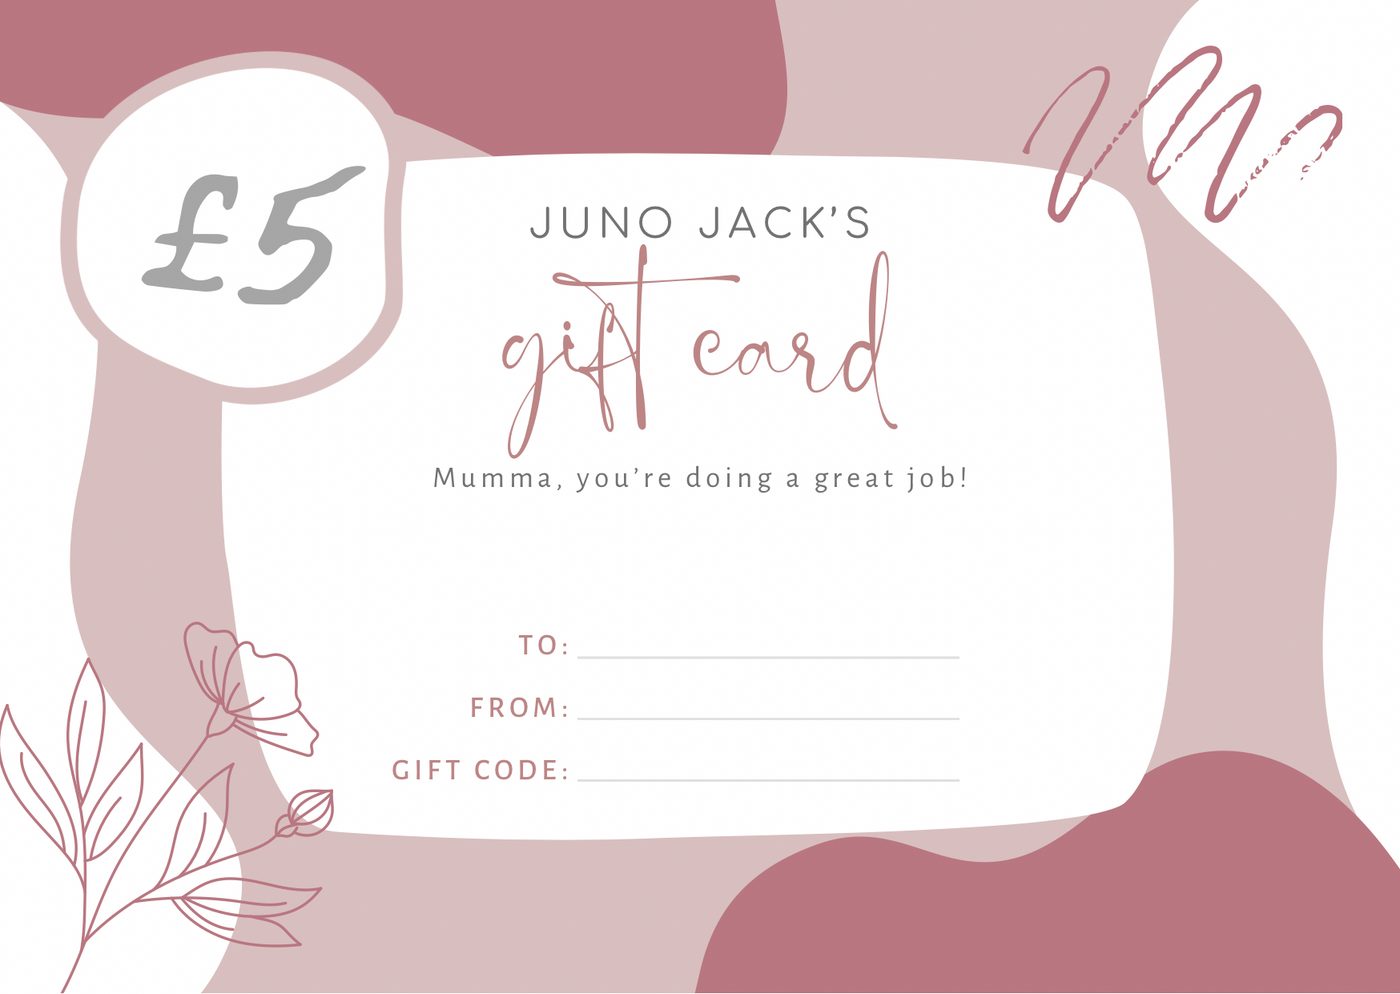 Juno Jack's Physical Gift Card